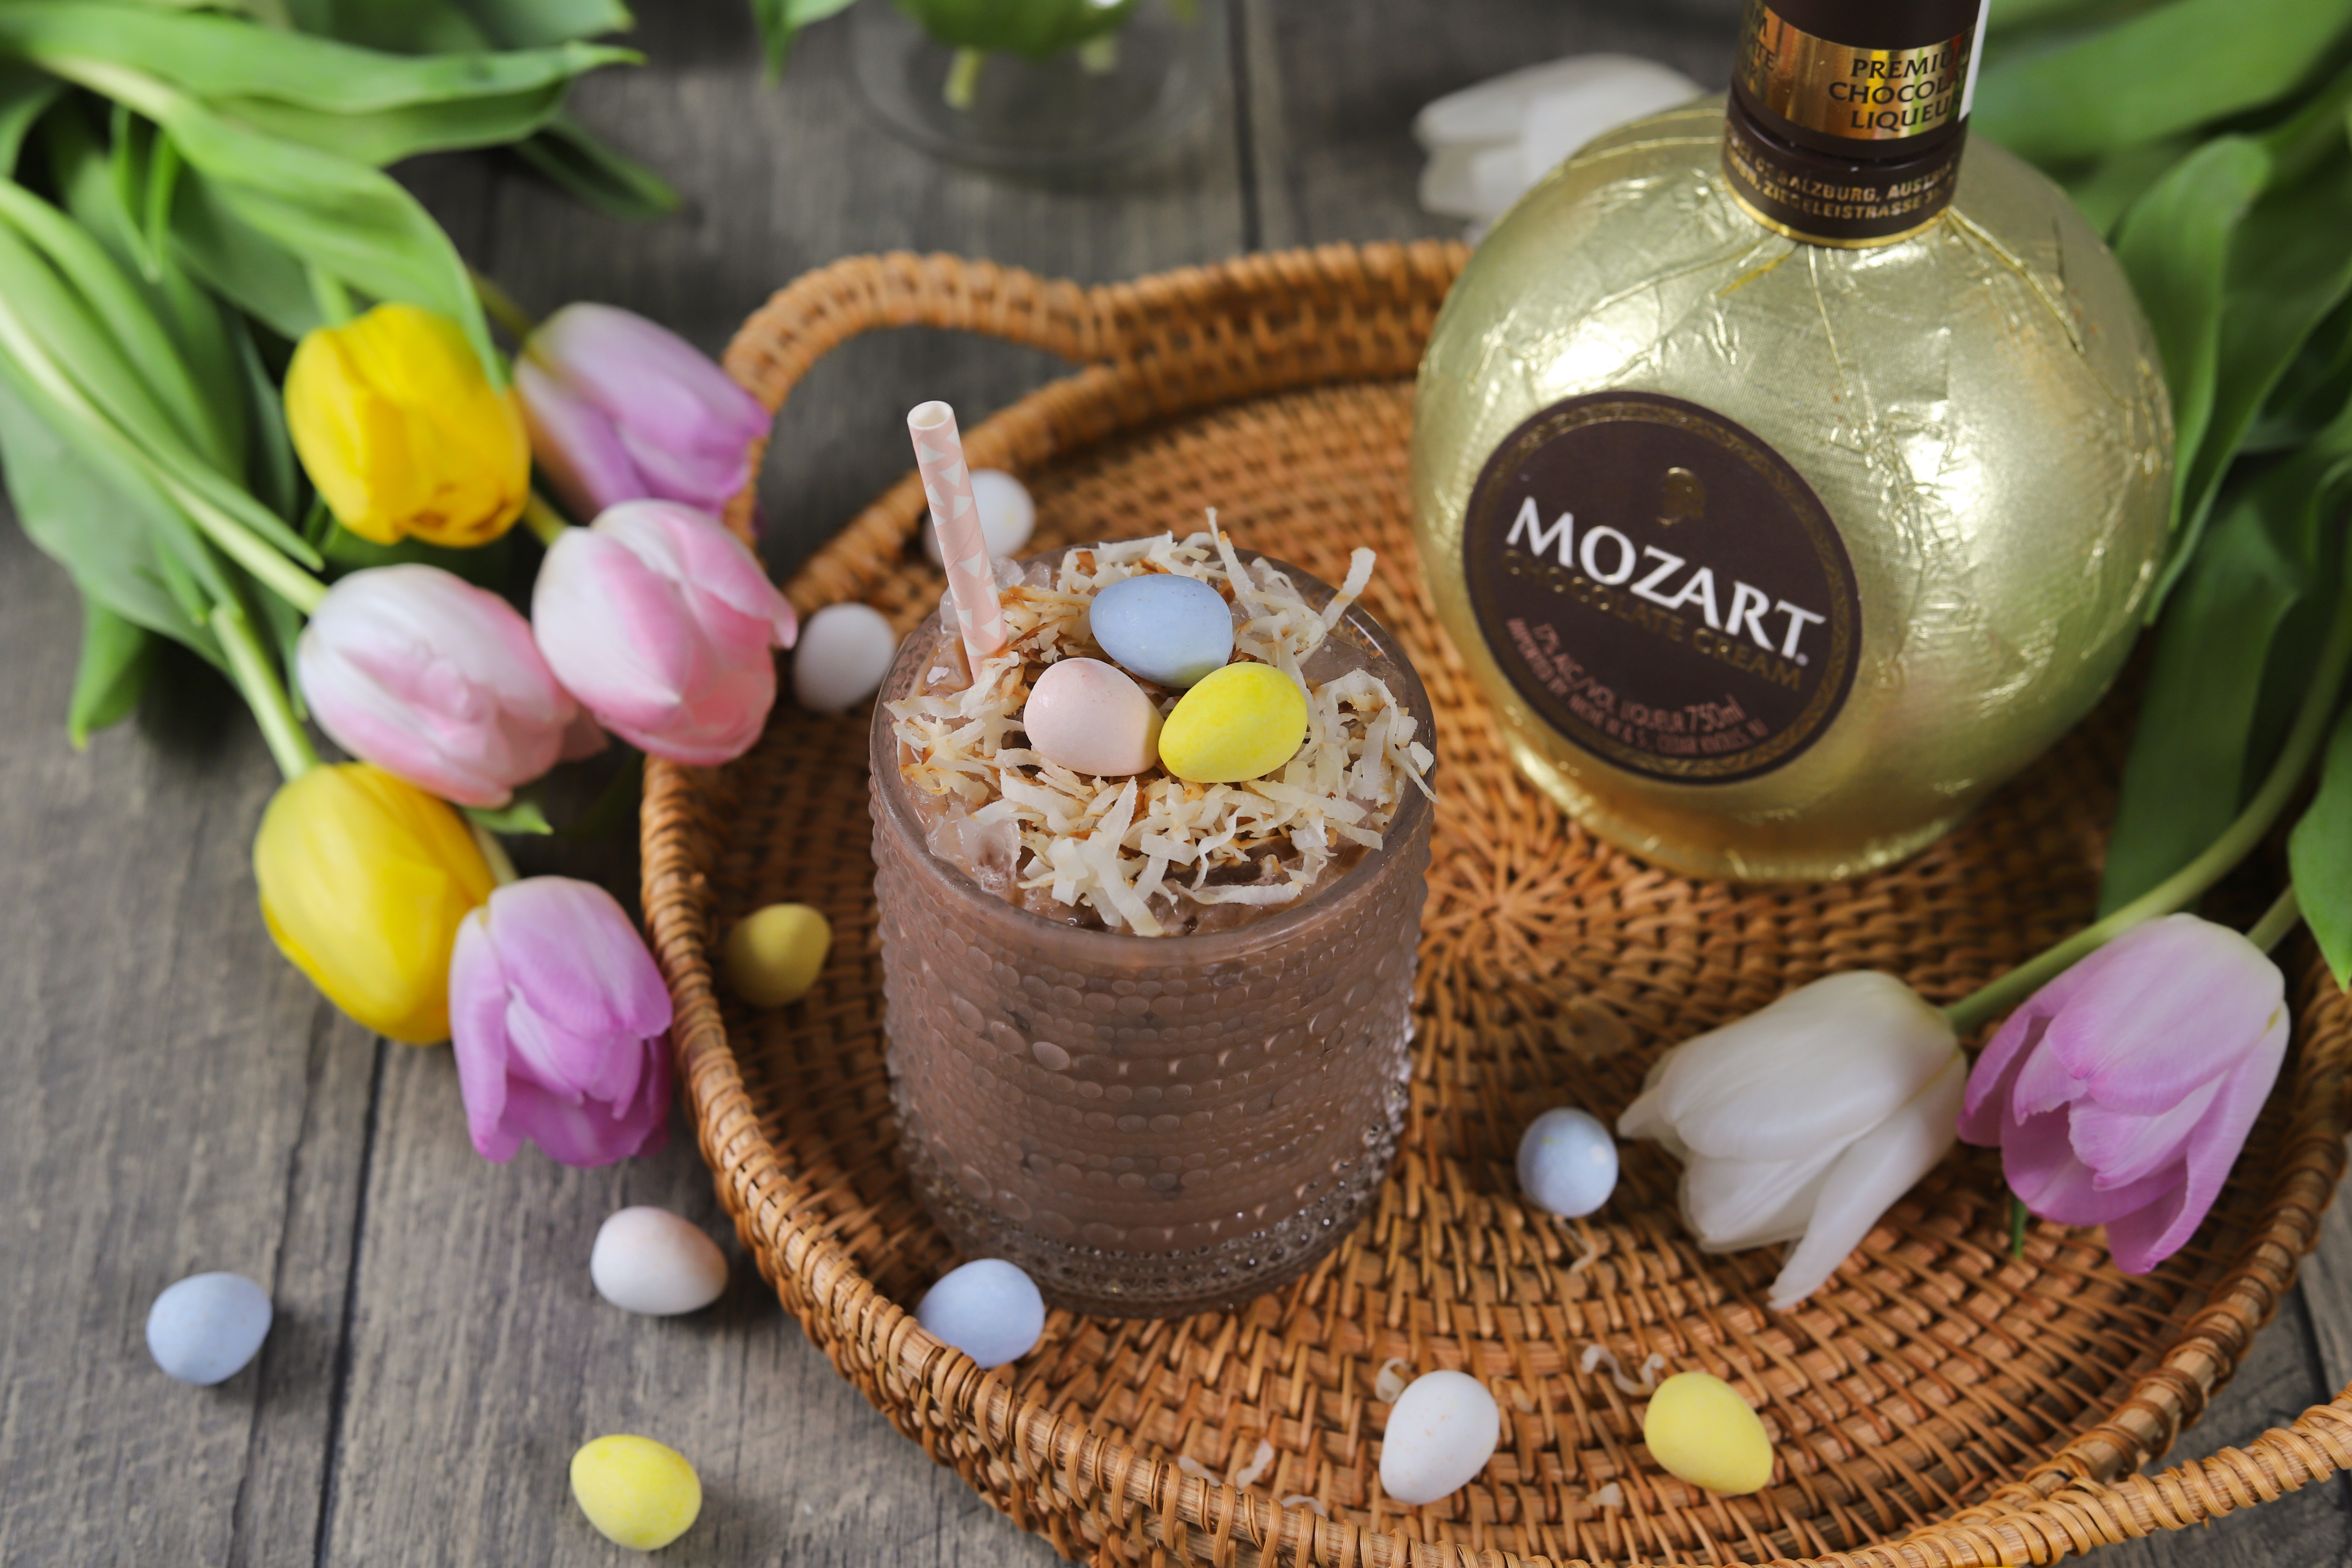 Early Bird with Mozart Chocolate Liqueur